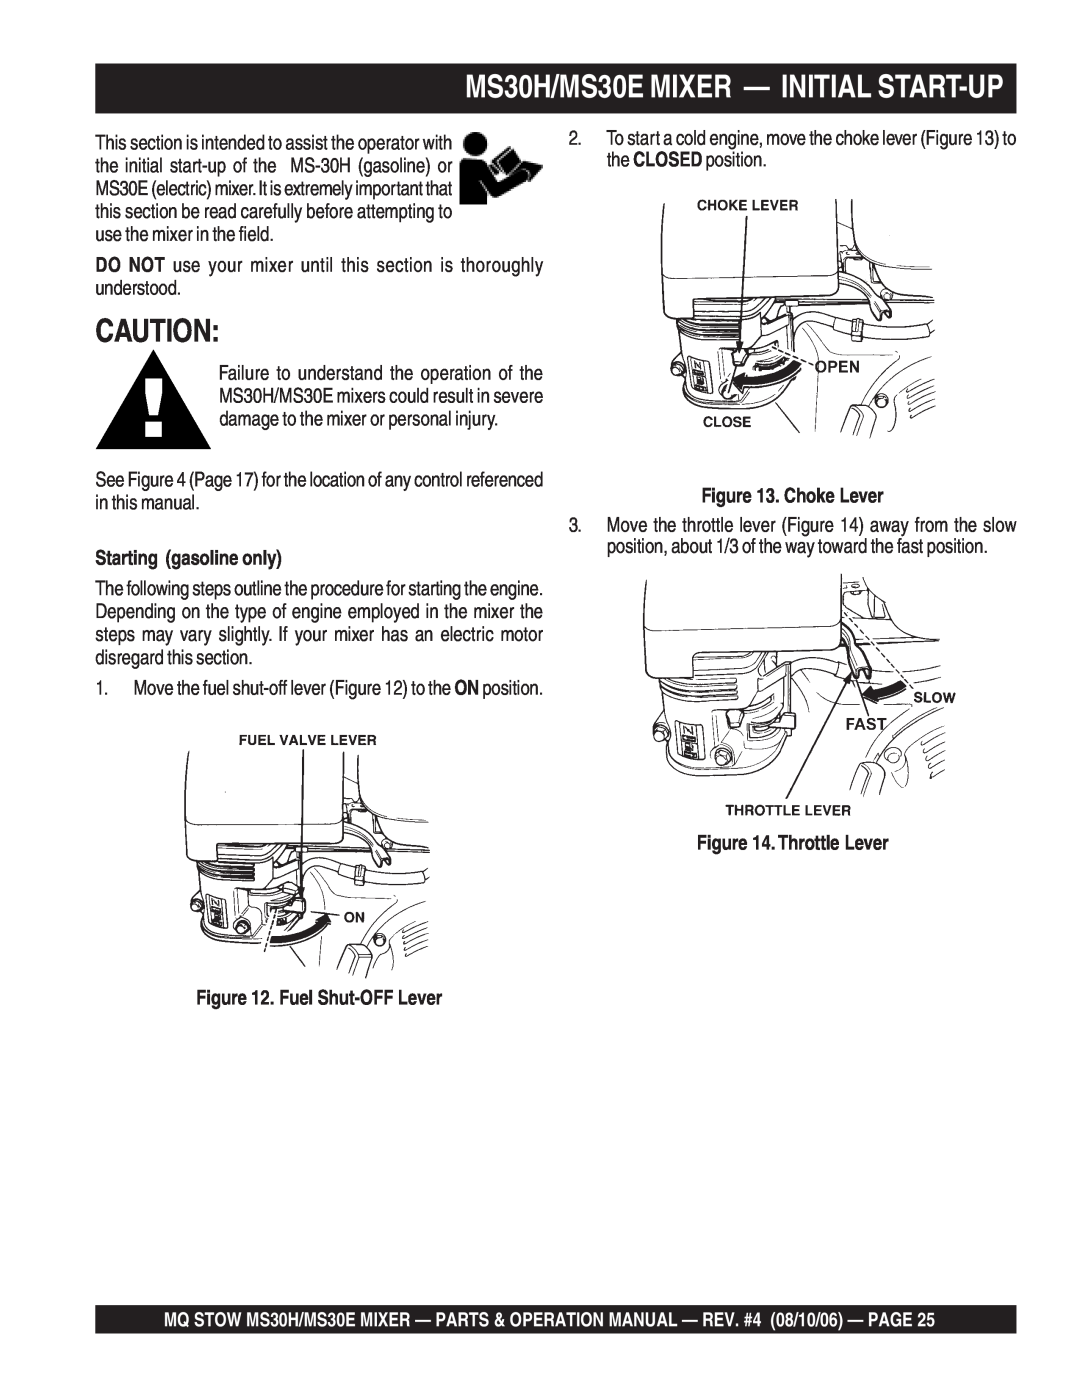 Sonic Alert manual MS30H/MS30E MIXER - INITIAL START-UP, Starting gasoline only, Choke Lever 